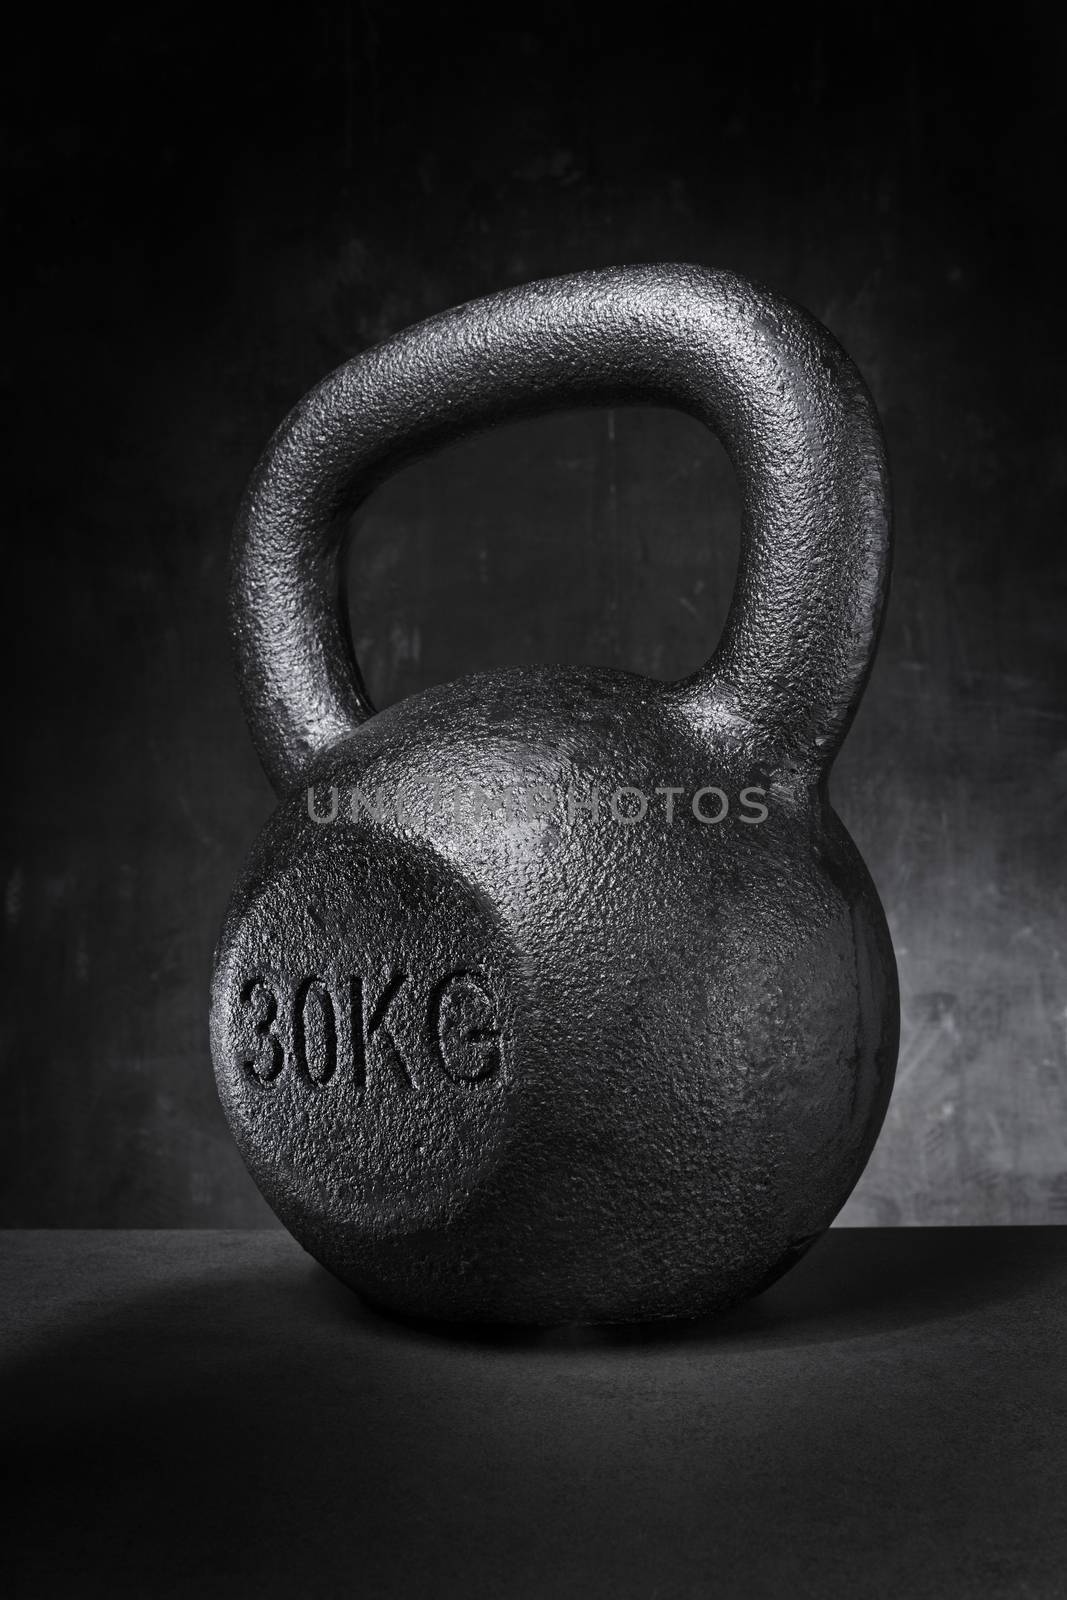 Kettlebell Workout by Stocksnapper